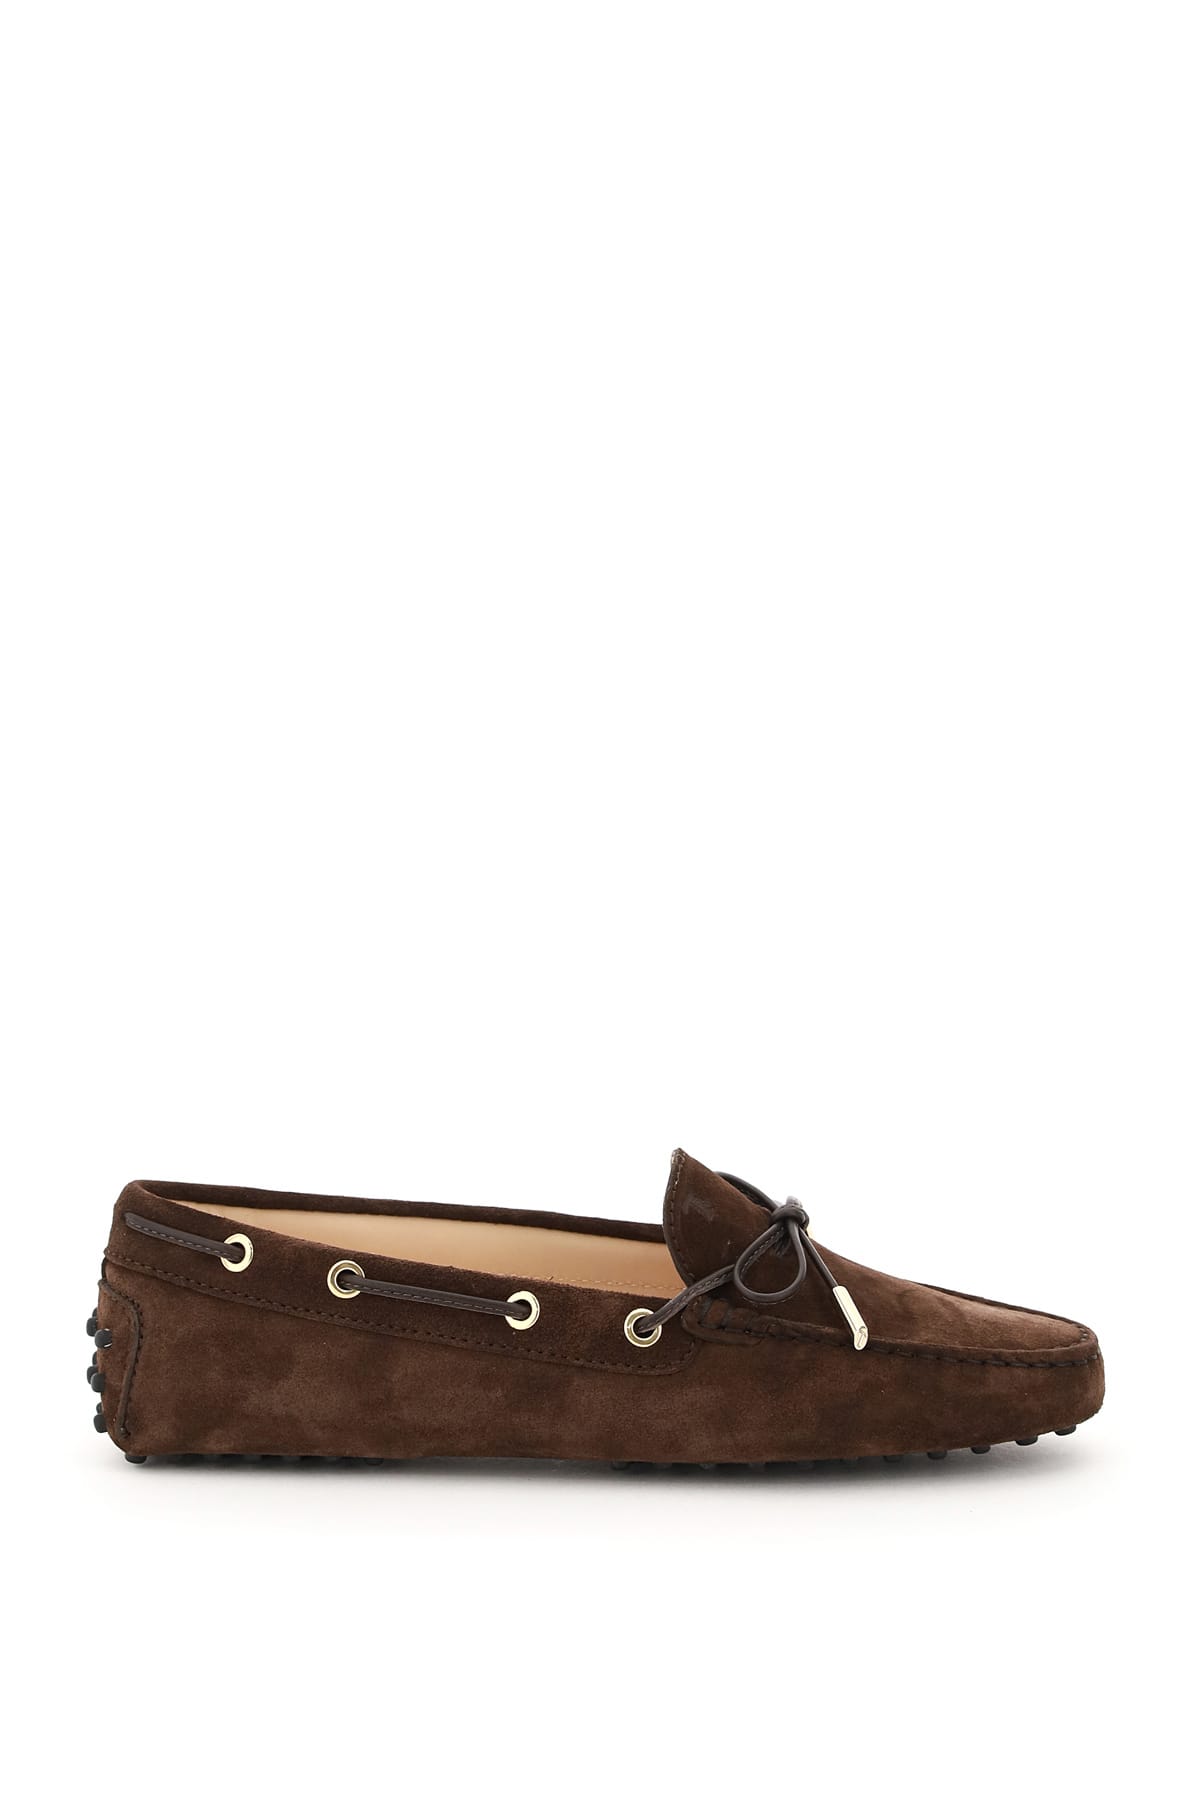 Tods Heaven Loafers Gommini